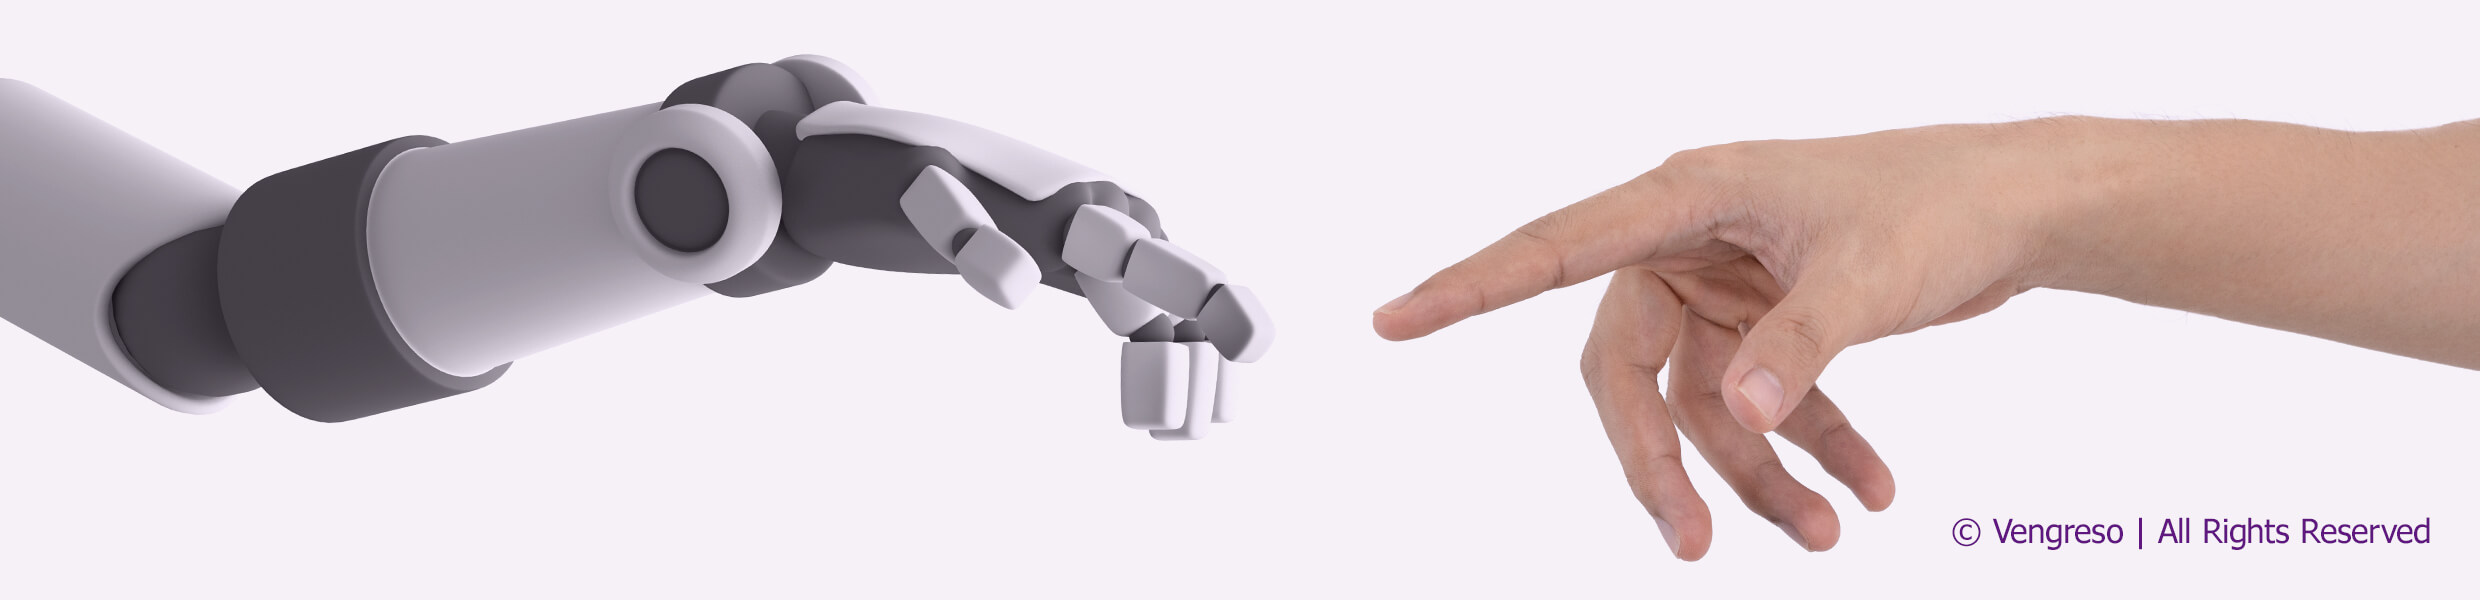 a robot hand reaching its finger out to touch a human man with its finger out